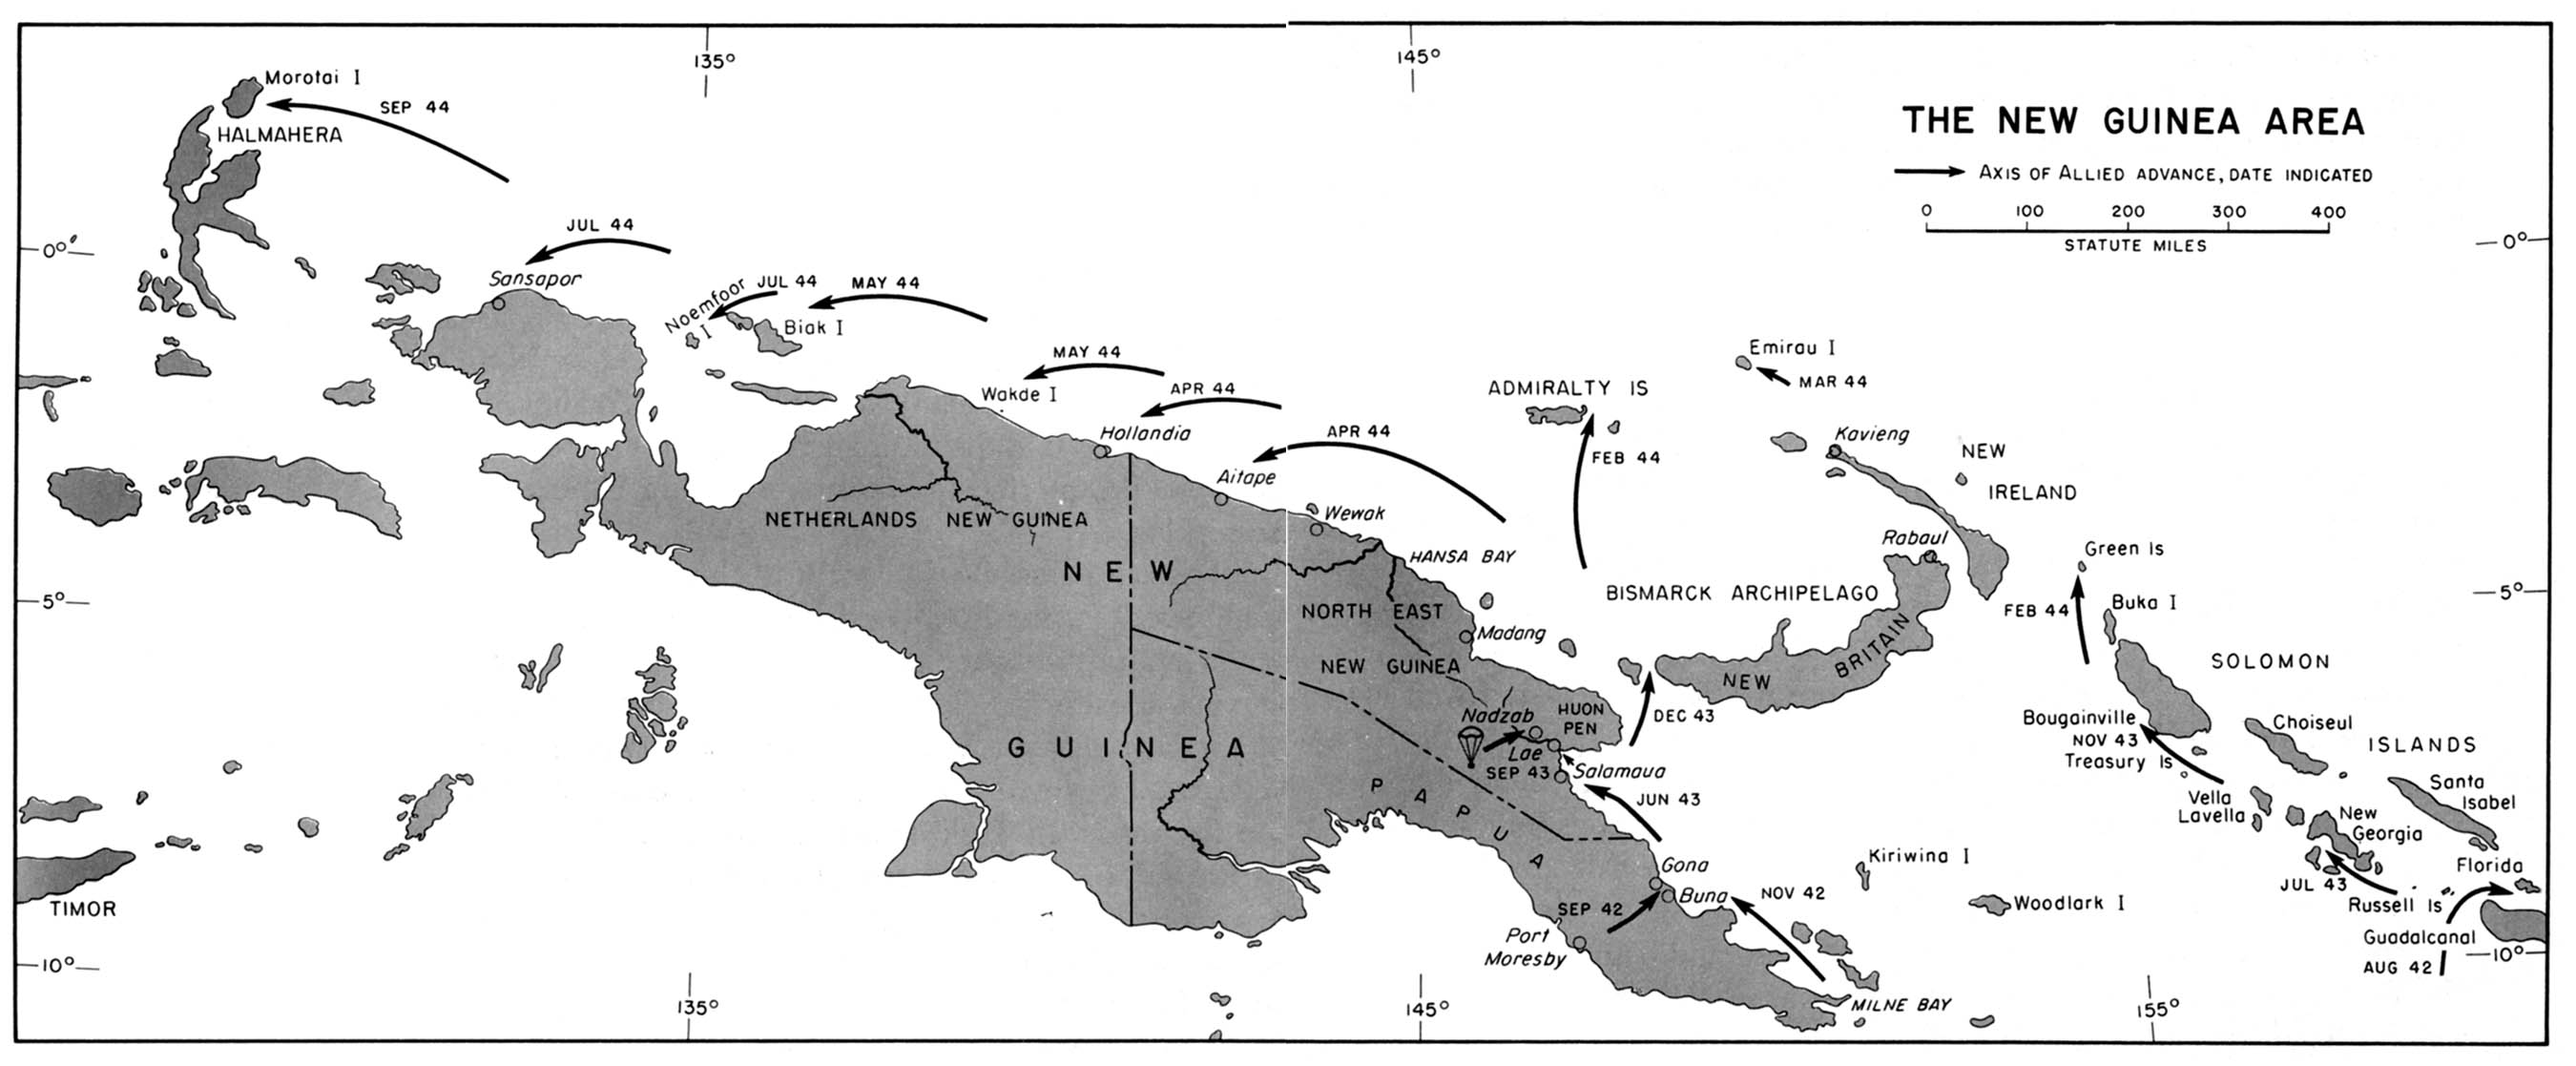 Historical Maps of World War II . New Guinea Area, 1942-1944 From American Military History, United States Army Center of Military History, 1989 (194K) 